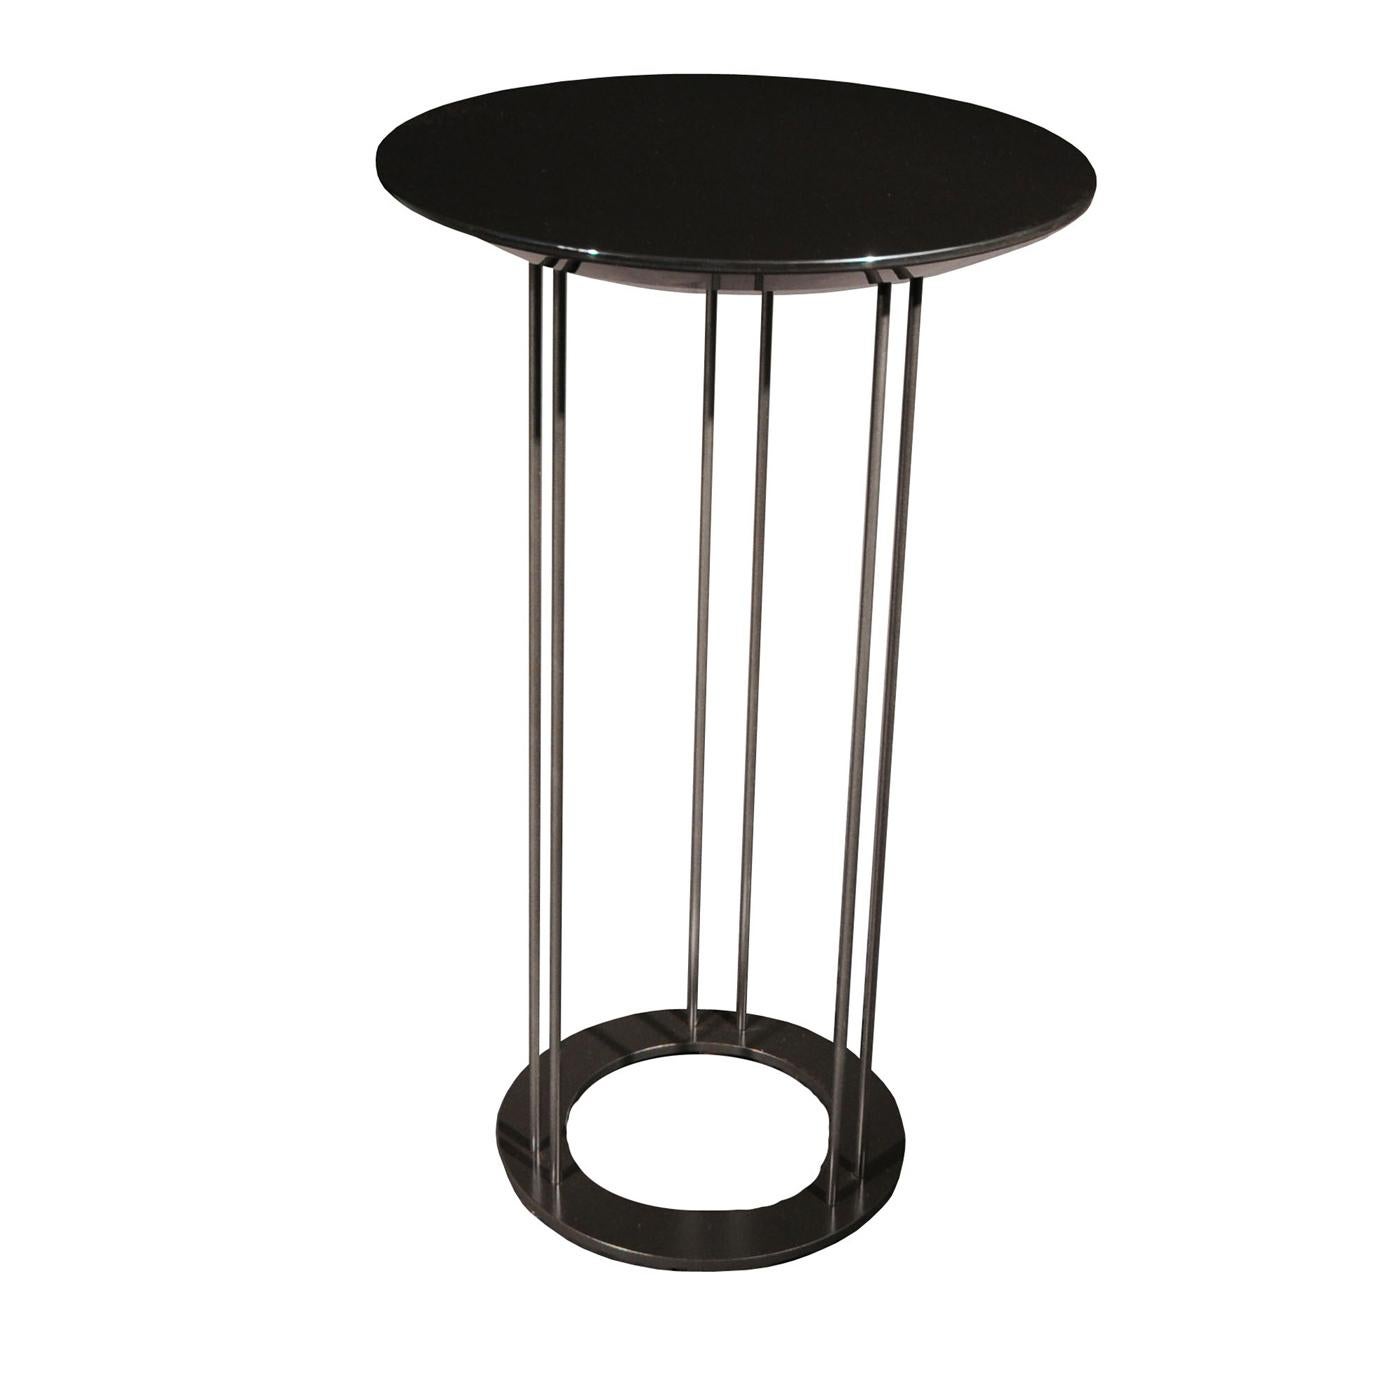 Boasting an elegant, total-black look, this exquisite tall coffee table will infuse any interior with subtle sophistication. The metal structure is composed of six slim and long legs divided into three pairs held together by a ring-shaped base, and